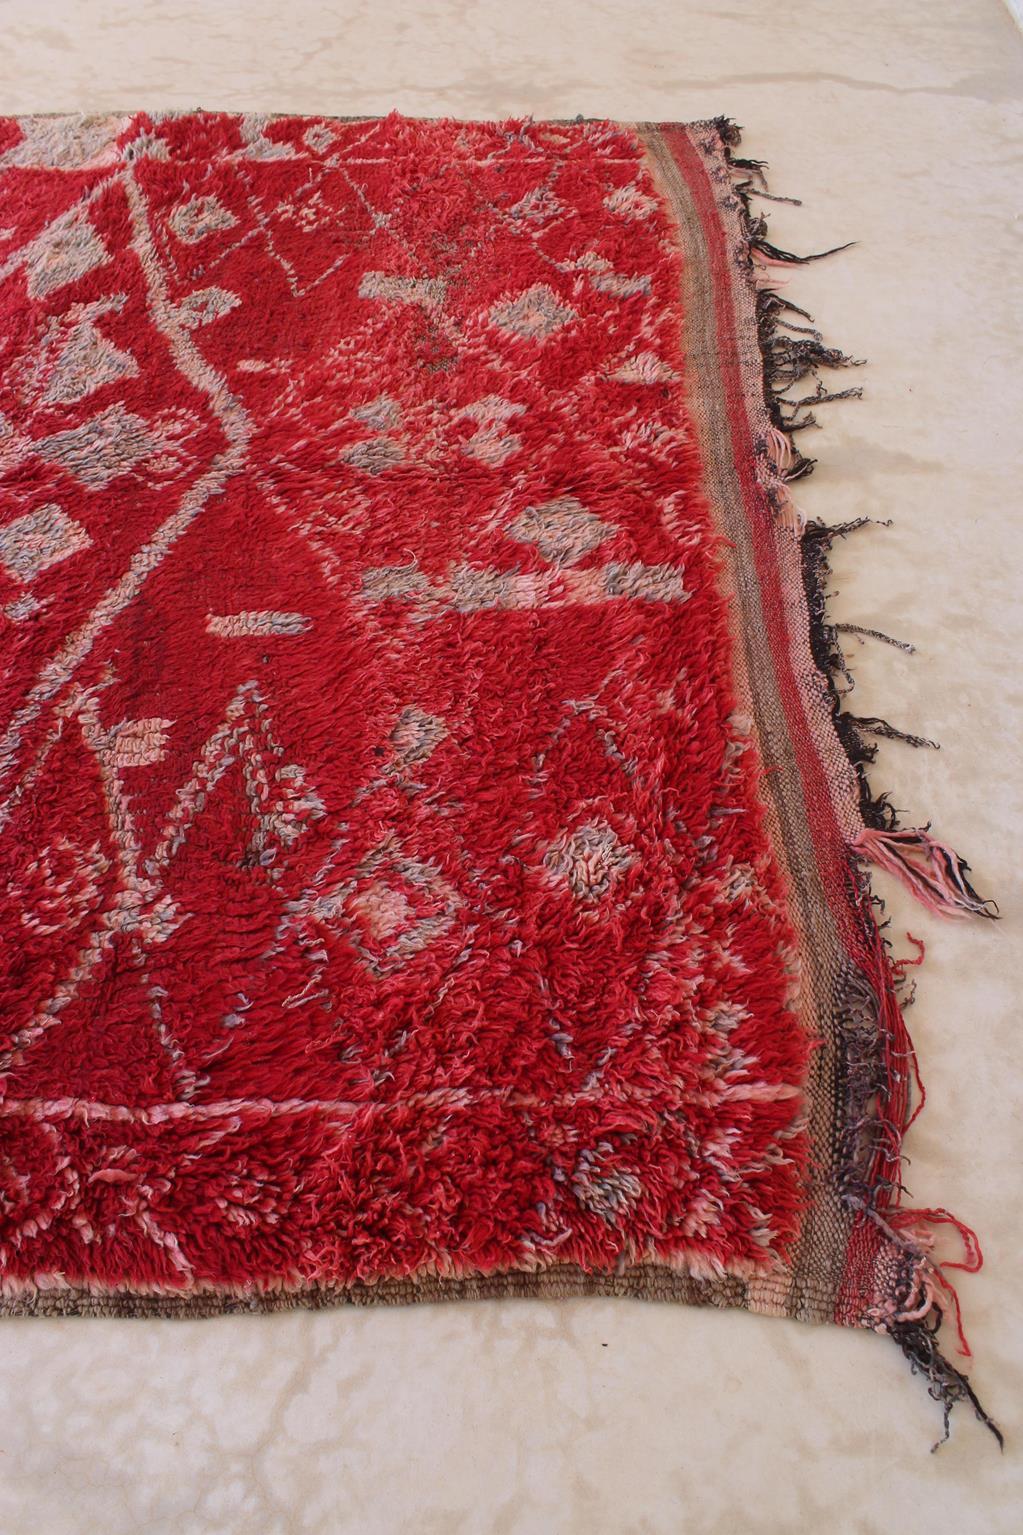 Vintage Moroccan Zayane rug - Red/green - 7x12feet / 213x365cm For Sale 3